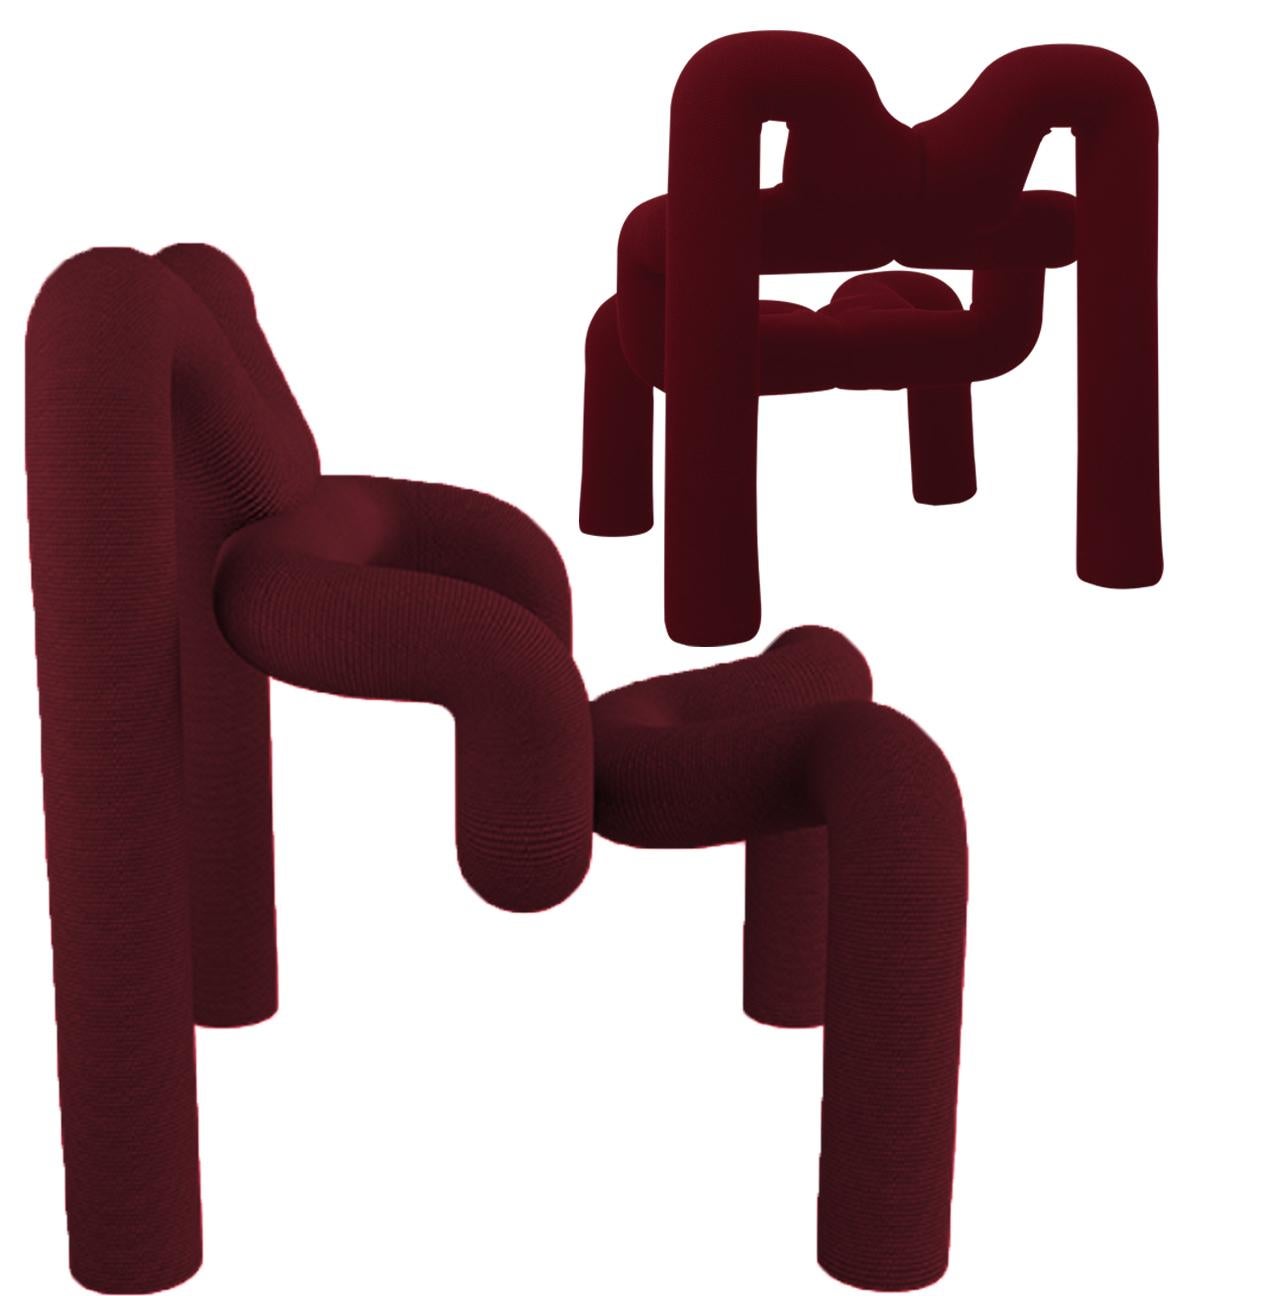 A pair of iconic and stylish armchairs handcrafted from Norway. Designed by Terje Ekstrom.

The chair is both modern and yet very functional. The design dates from the late 1970s. The color is Bordeaux. It’s distinguished by its design purity and